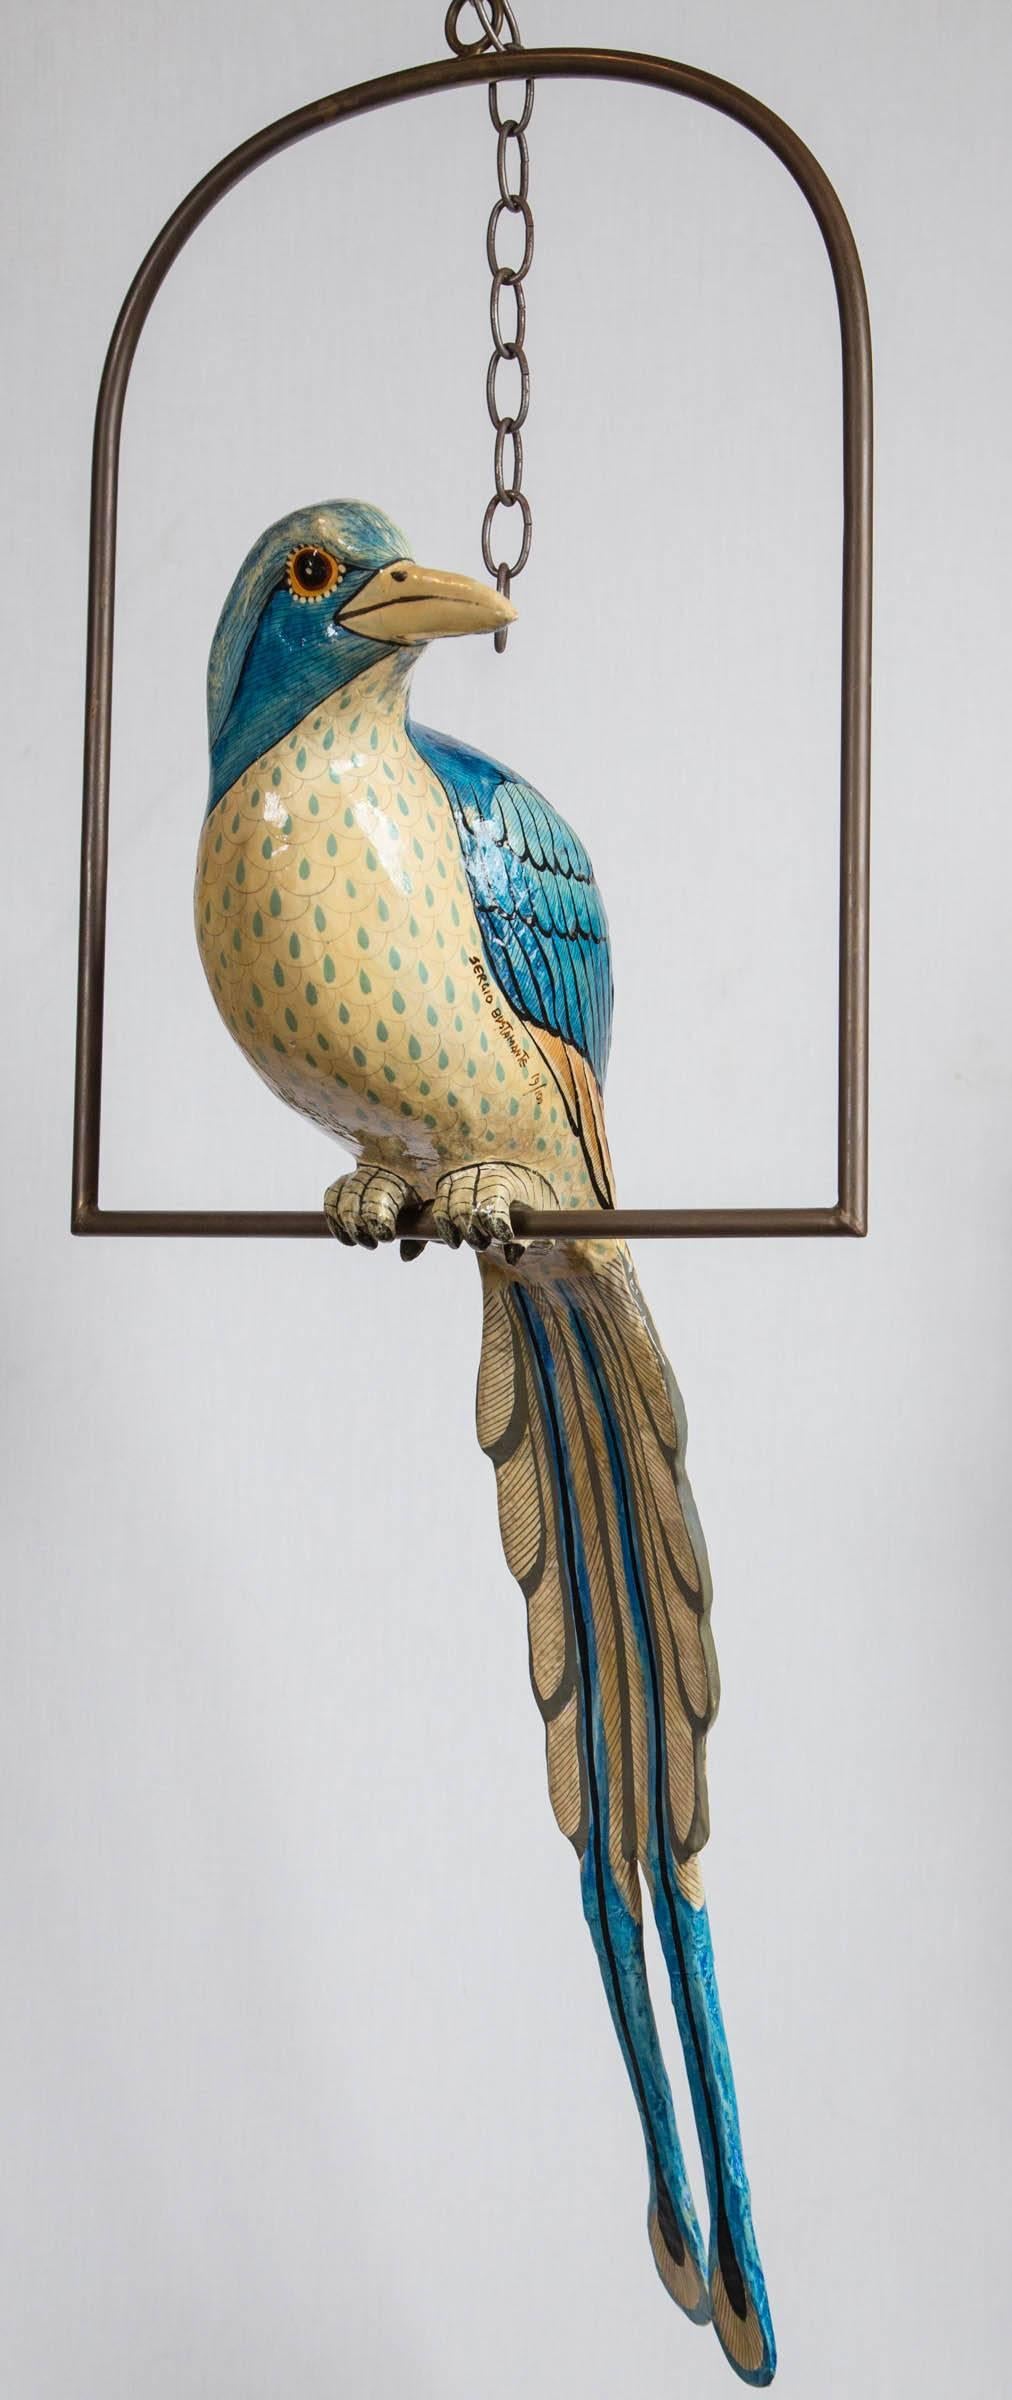 Colorful papier mâché bird on a brass swing by Sergio Bustamante.
Signed and marked 19/100.